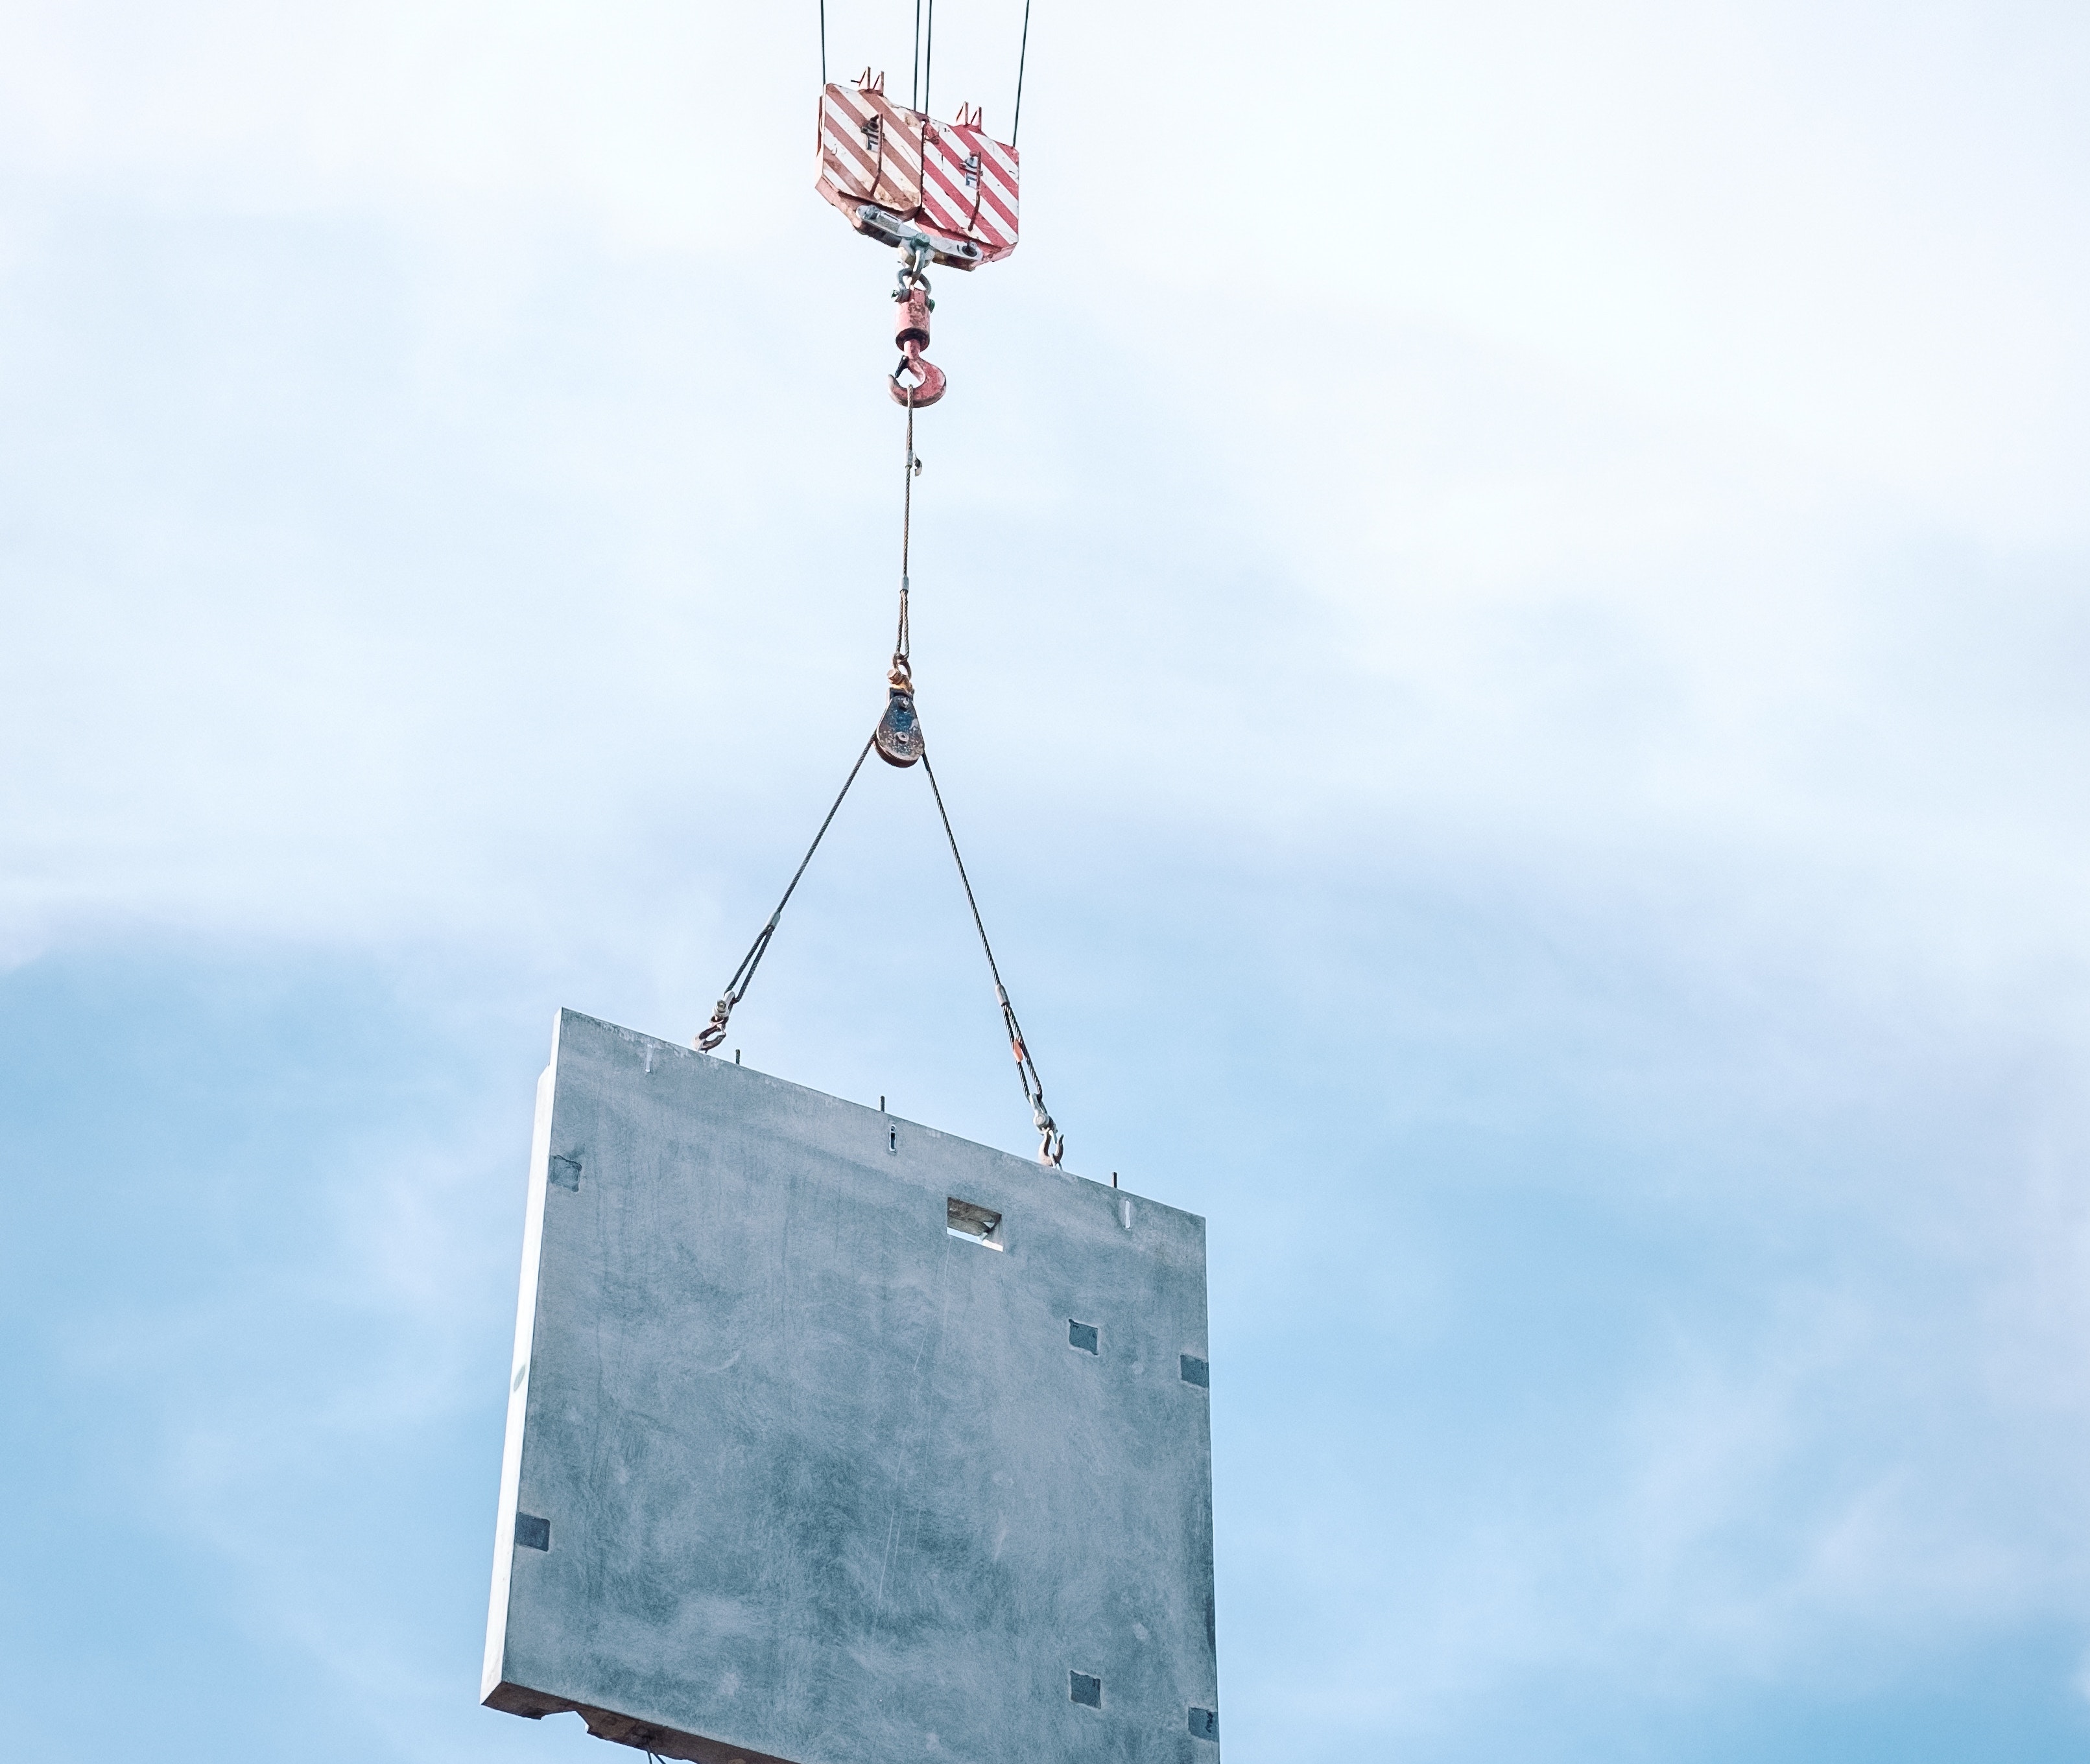 Prefab wall panel being lowered into place by a crane